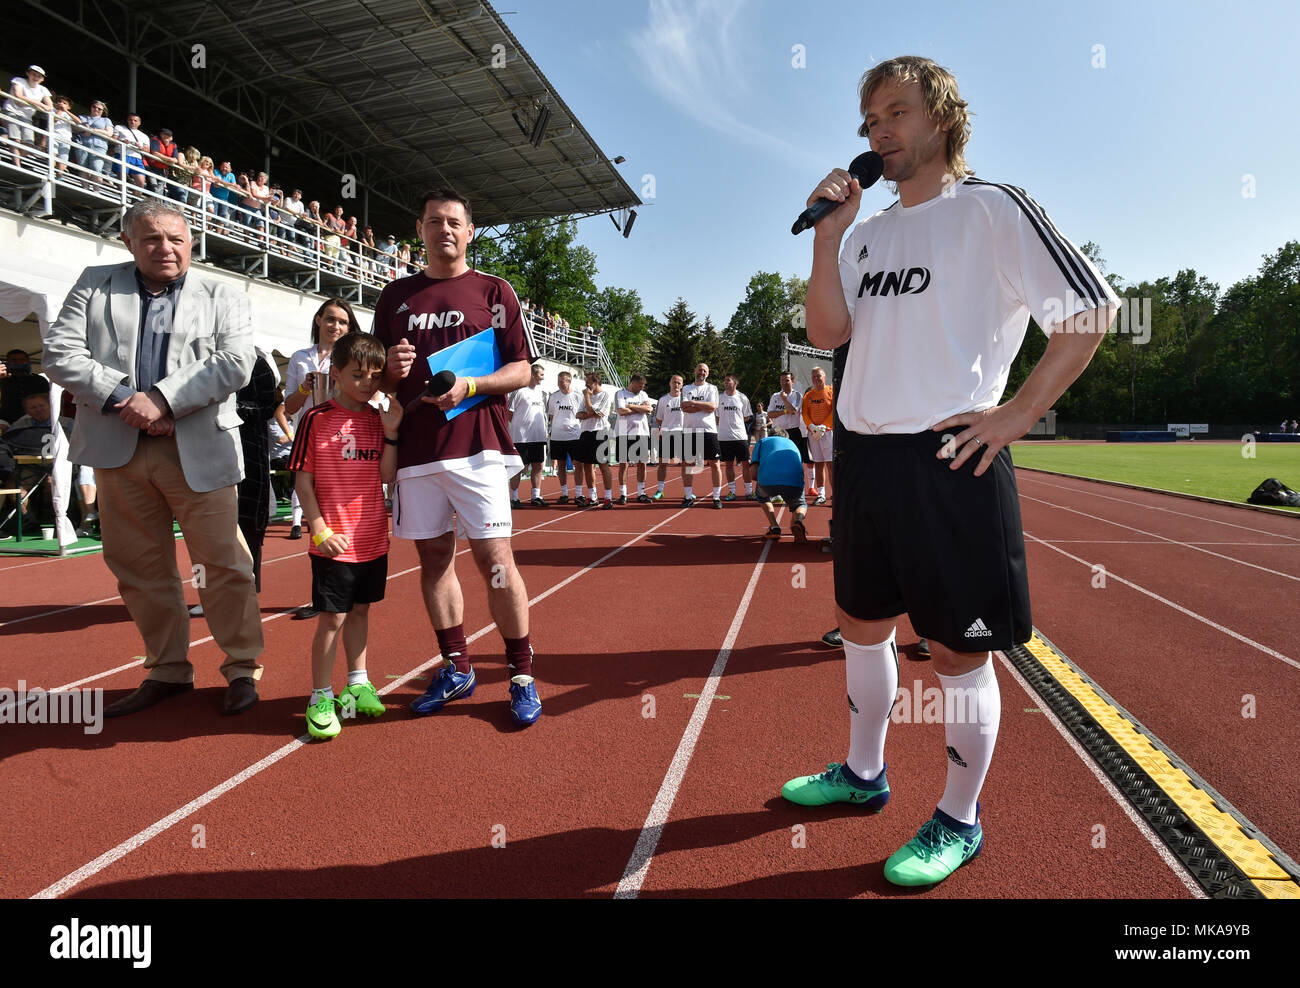 Hodonin, Czech Republic. 05th May, 2018. Former Czech soccer player Pavel Nedved speaks during the benefit match FK Hodonin vs second placed team of the European football championship 1996 prior to 100 years of Hodonin football events in Hodonin, Czech Republic, May 5, 2018. Credit: Dalibor Gluck/CTK Photo/Alamy Live News Stock Photo